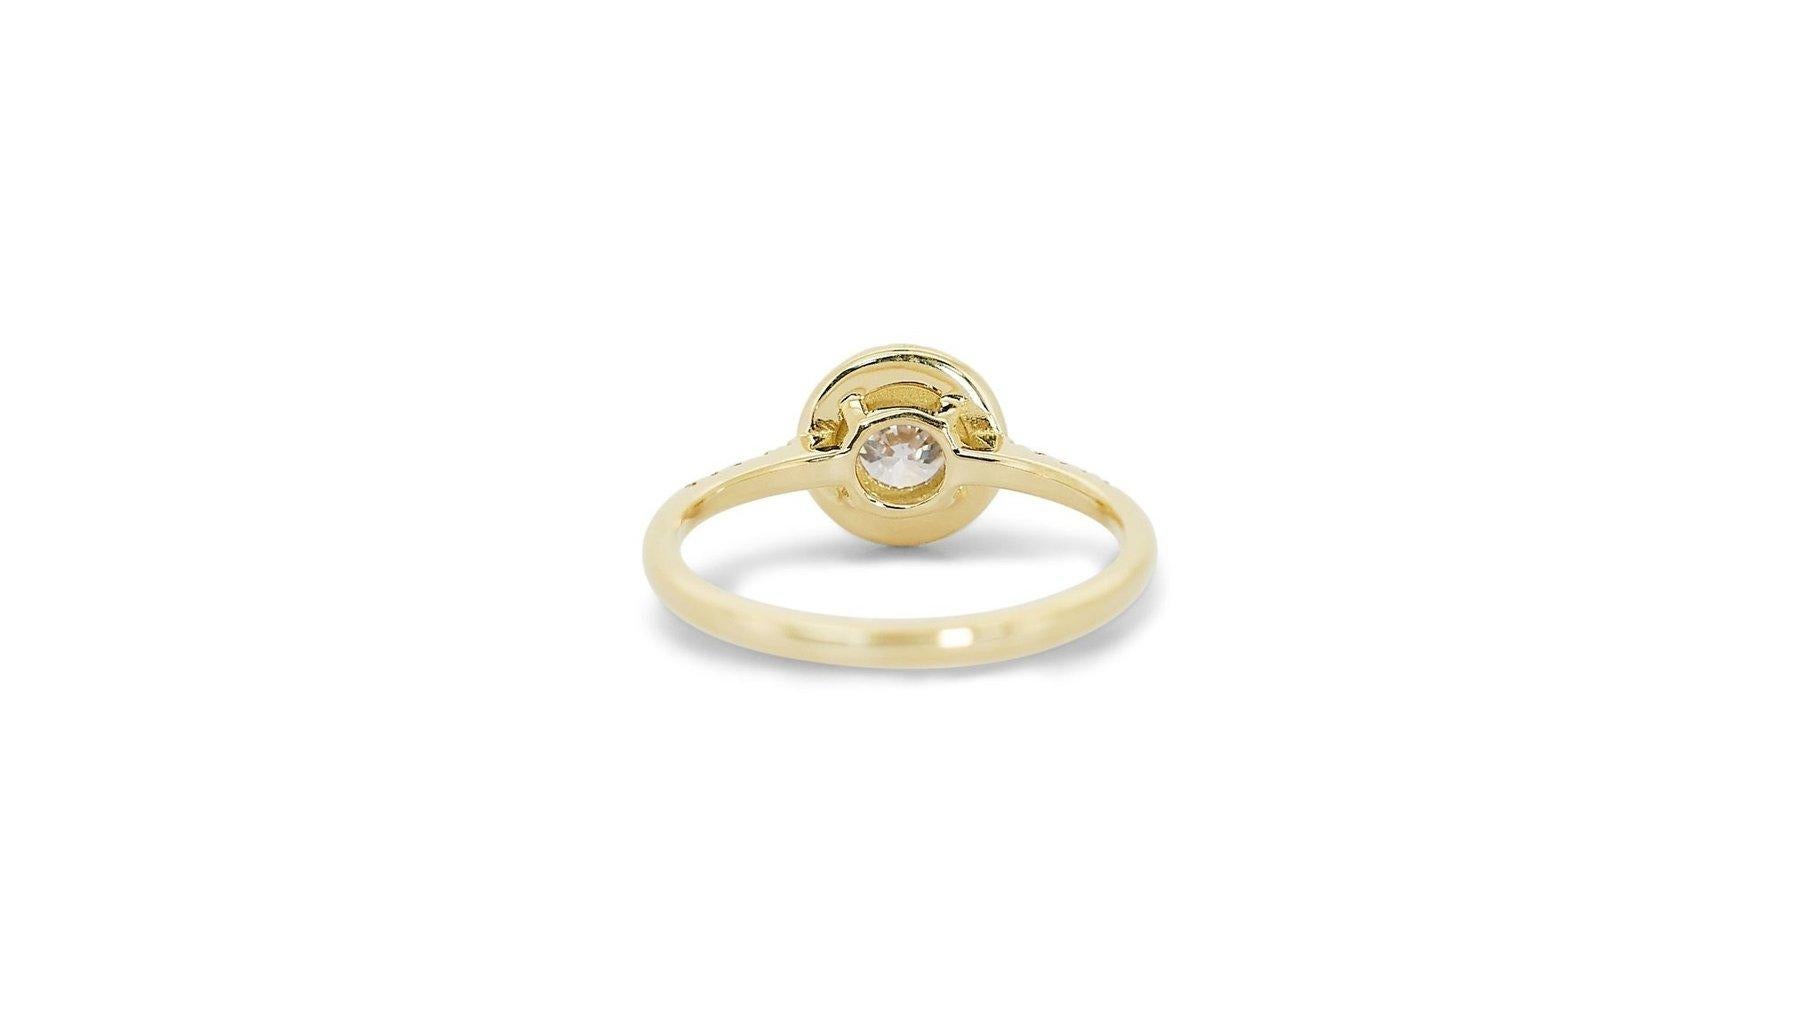 Dazzling 1.36ct Diamonds Halo Ring in 18k Yellow Gold - GIA Certified For Sale 2